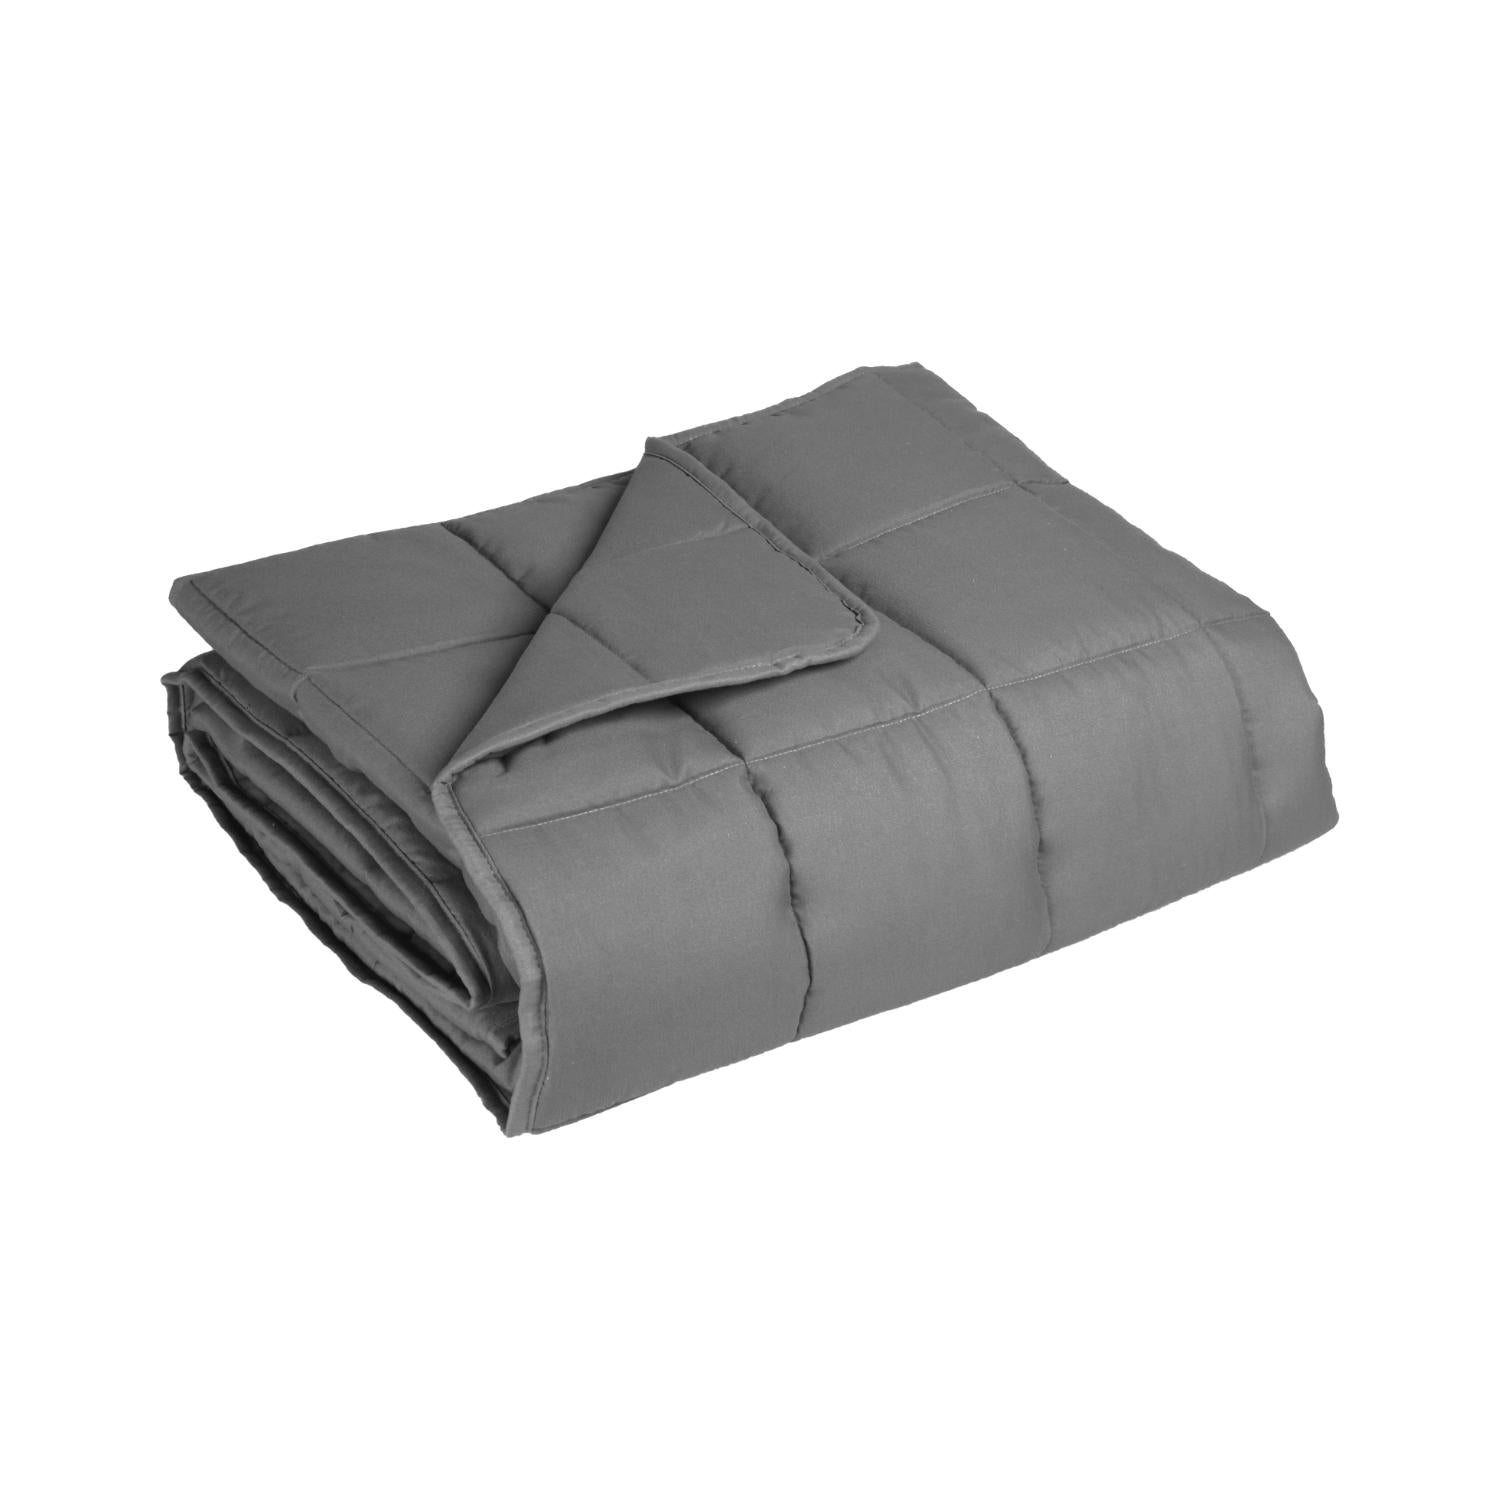 Gominimo Weighted Blanket 9KG Light Grey